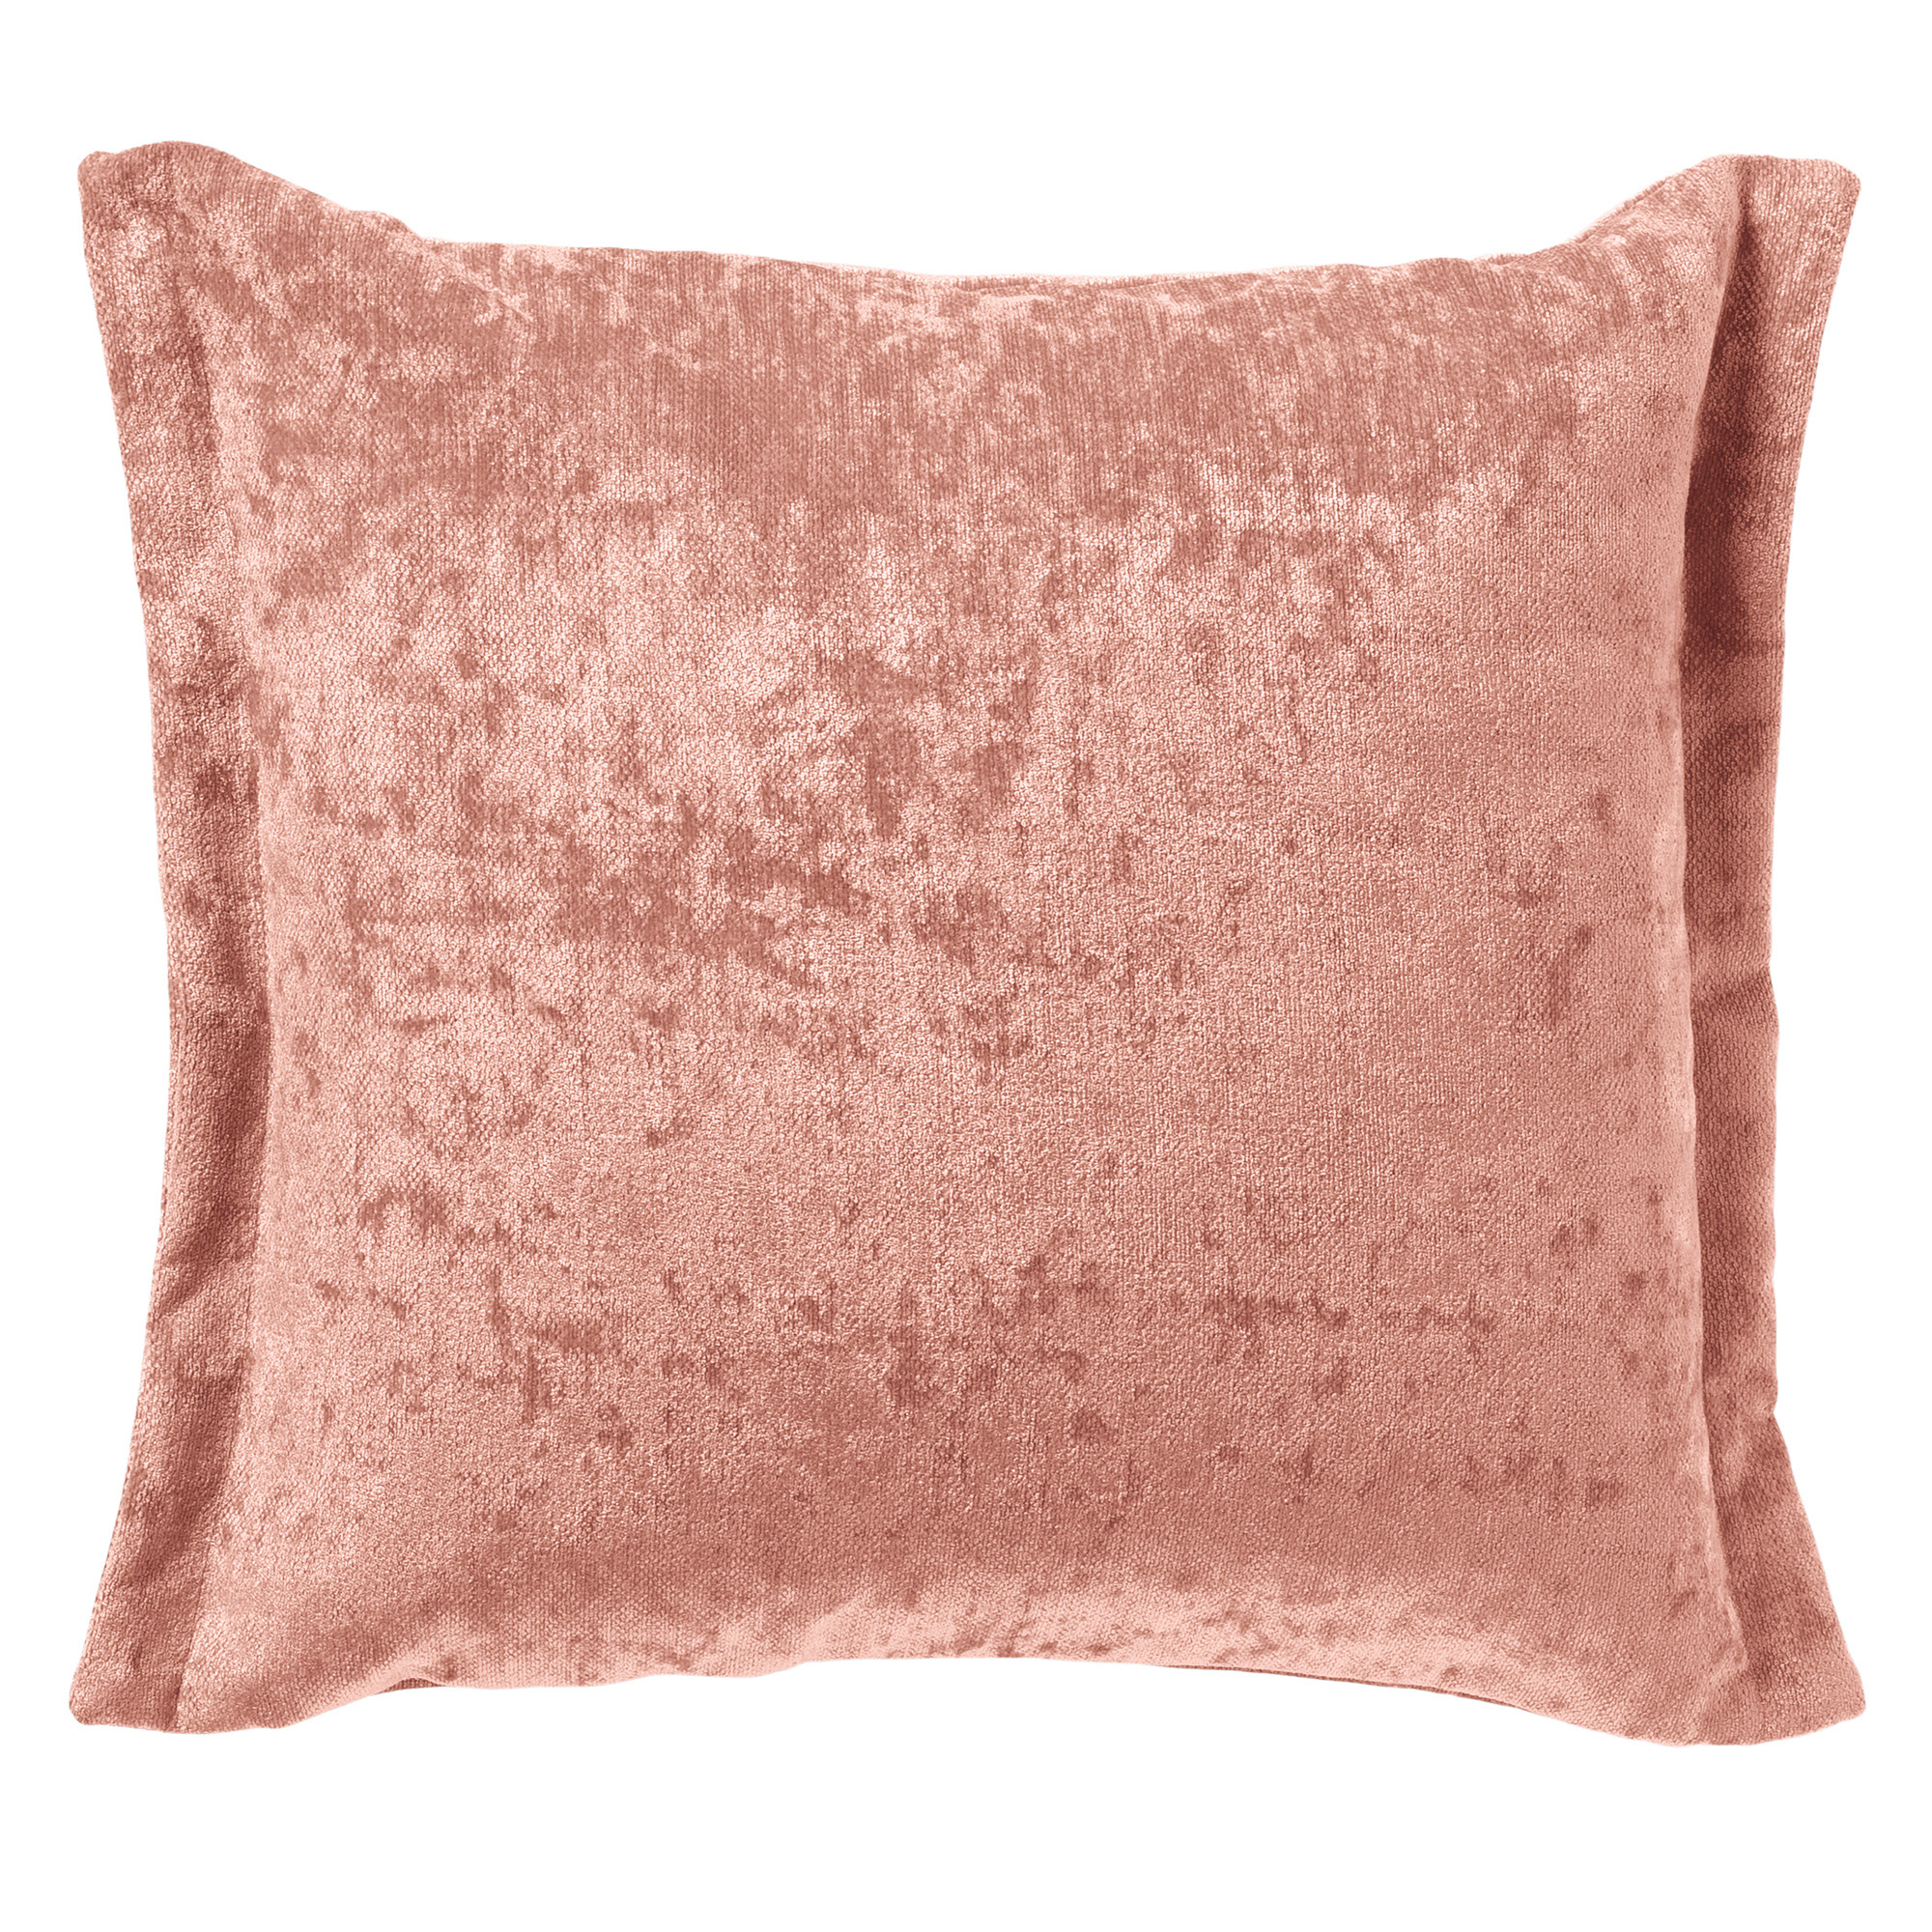 LEWIS - Cushion 45x45 cm Muted Clay - pink